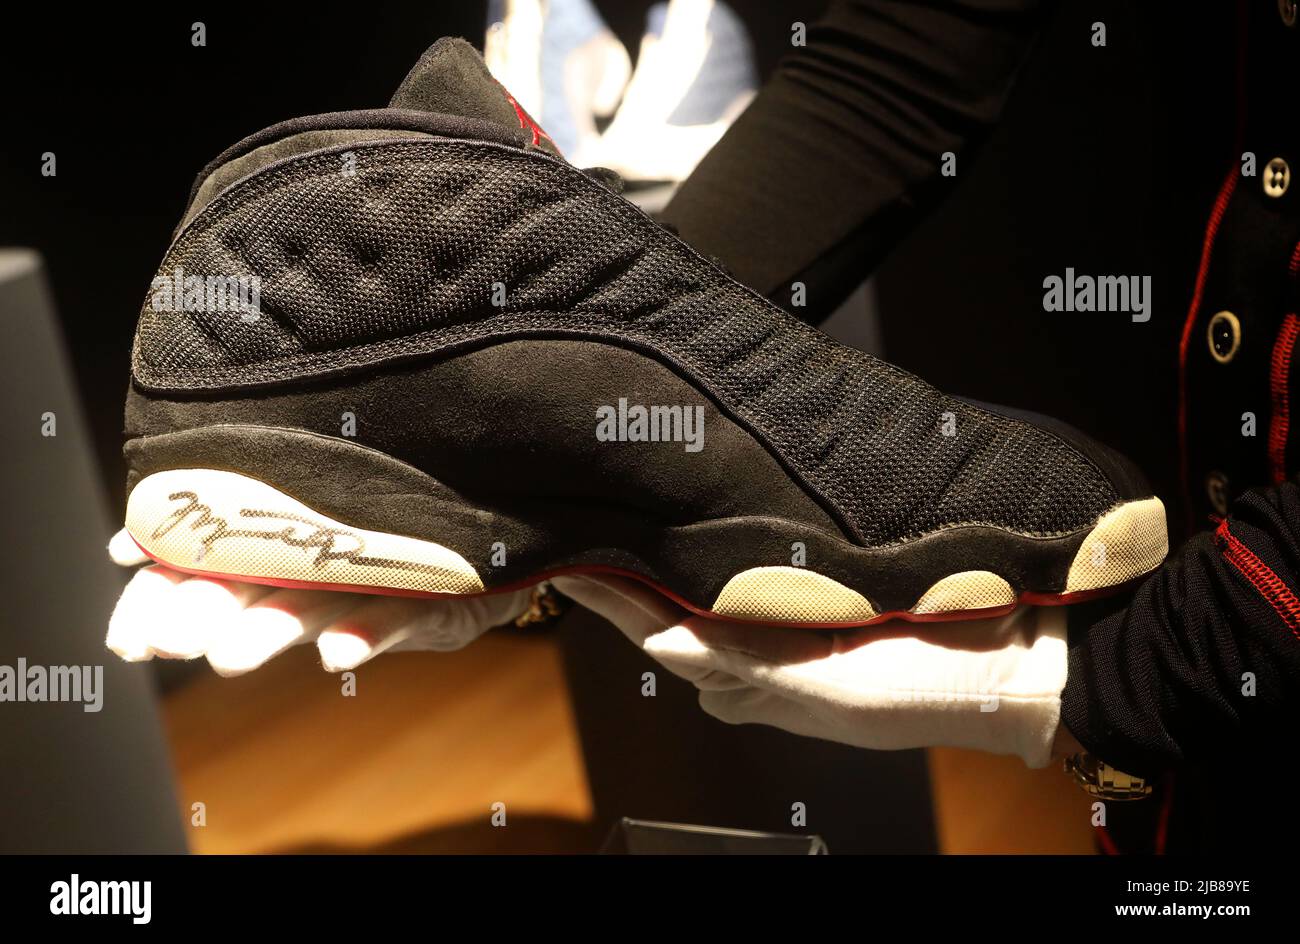 Jordans Sneakers High Resolution Stock Photography and Images - Alamy